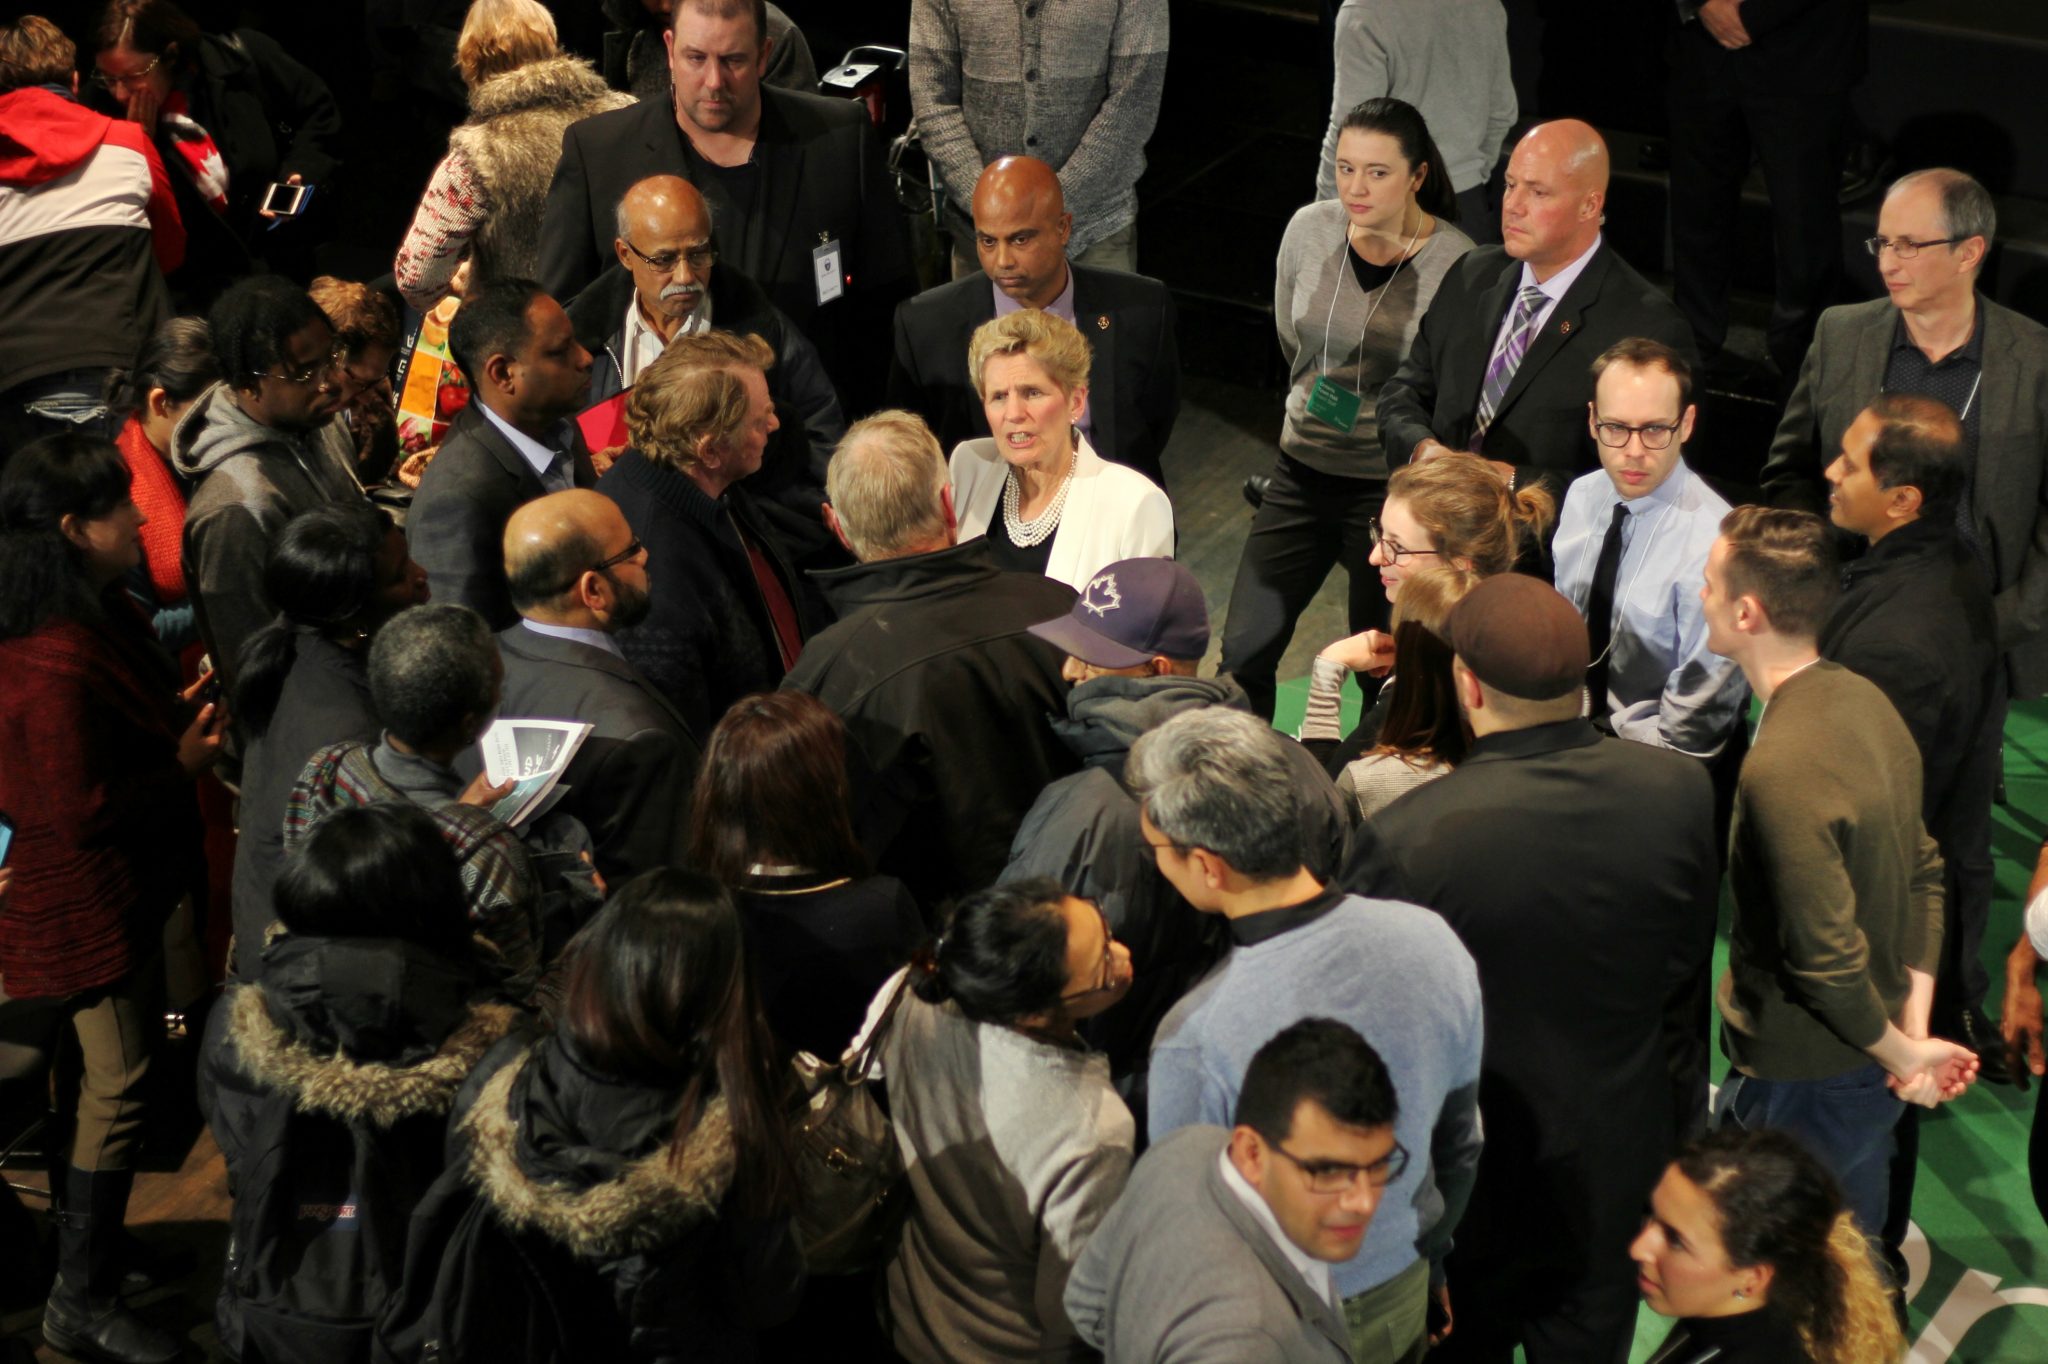 Kathleen Wynne faces tough questions at town hall chat